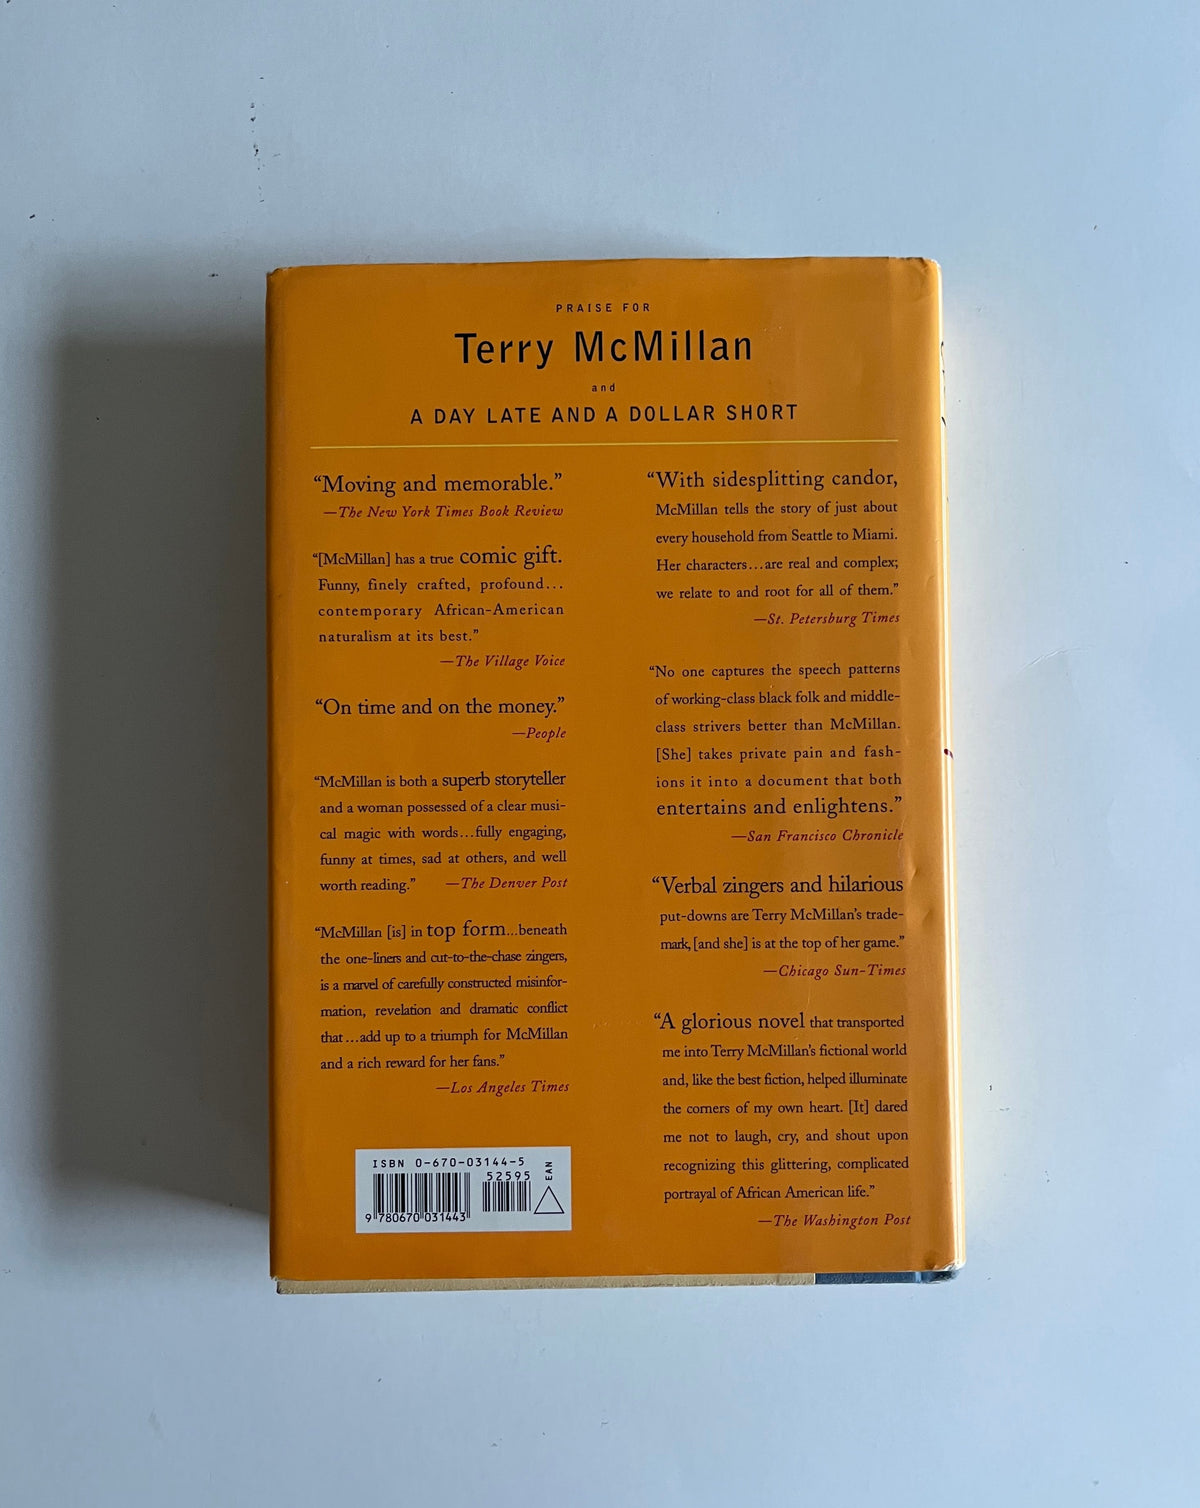 The Interruption of Everything by Terry McMillan